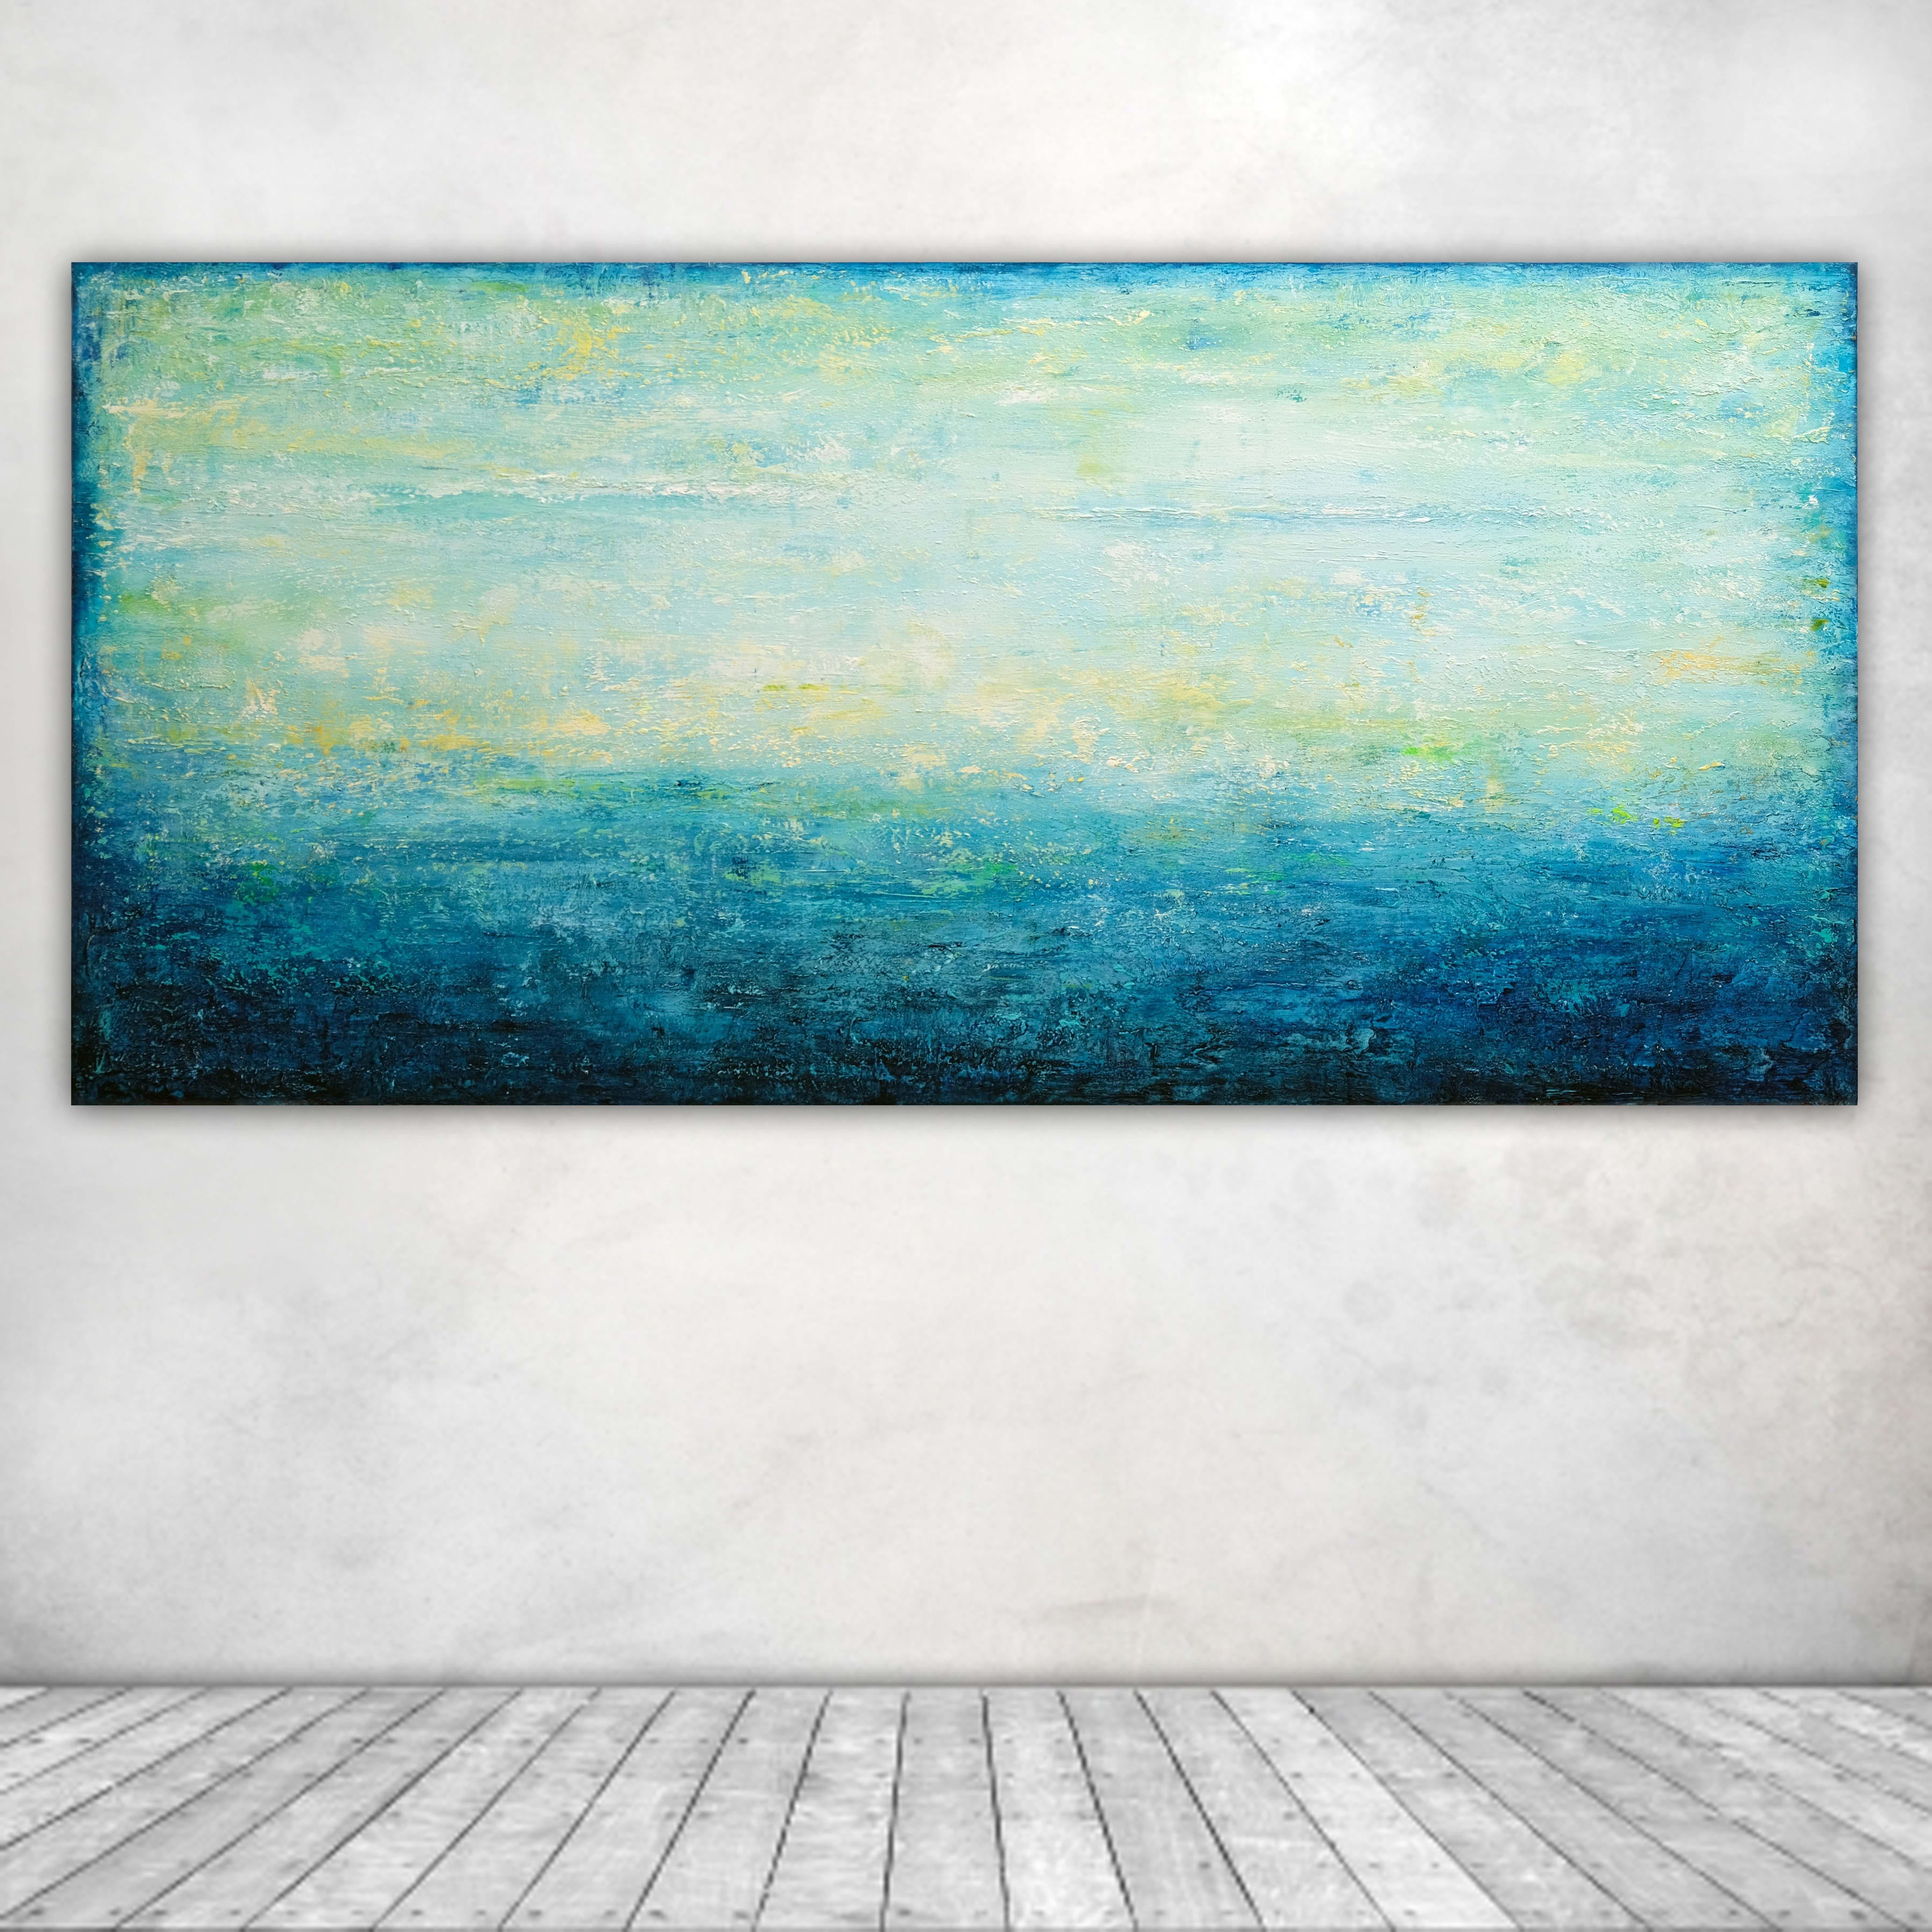 Turquoise Dreamscape V, COMMISSION, Acrylic on Canvas - Painting by Behshad Arjomandi